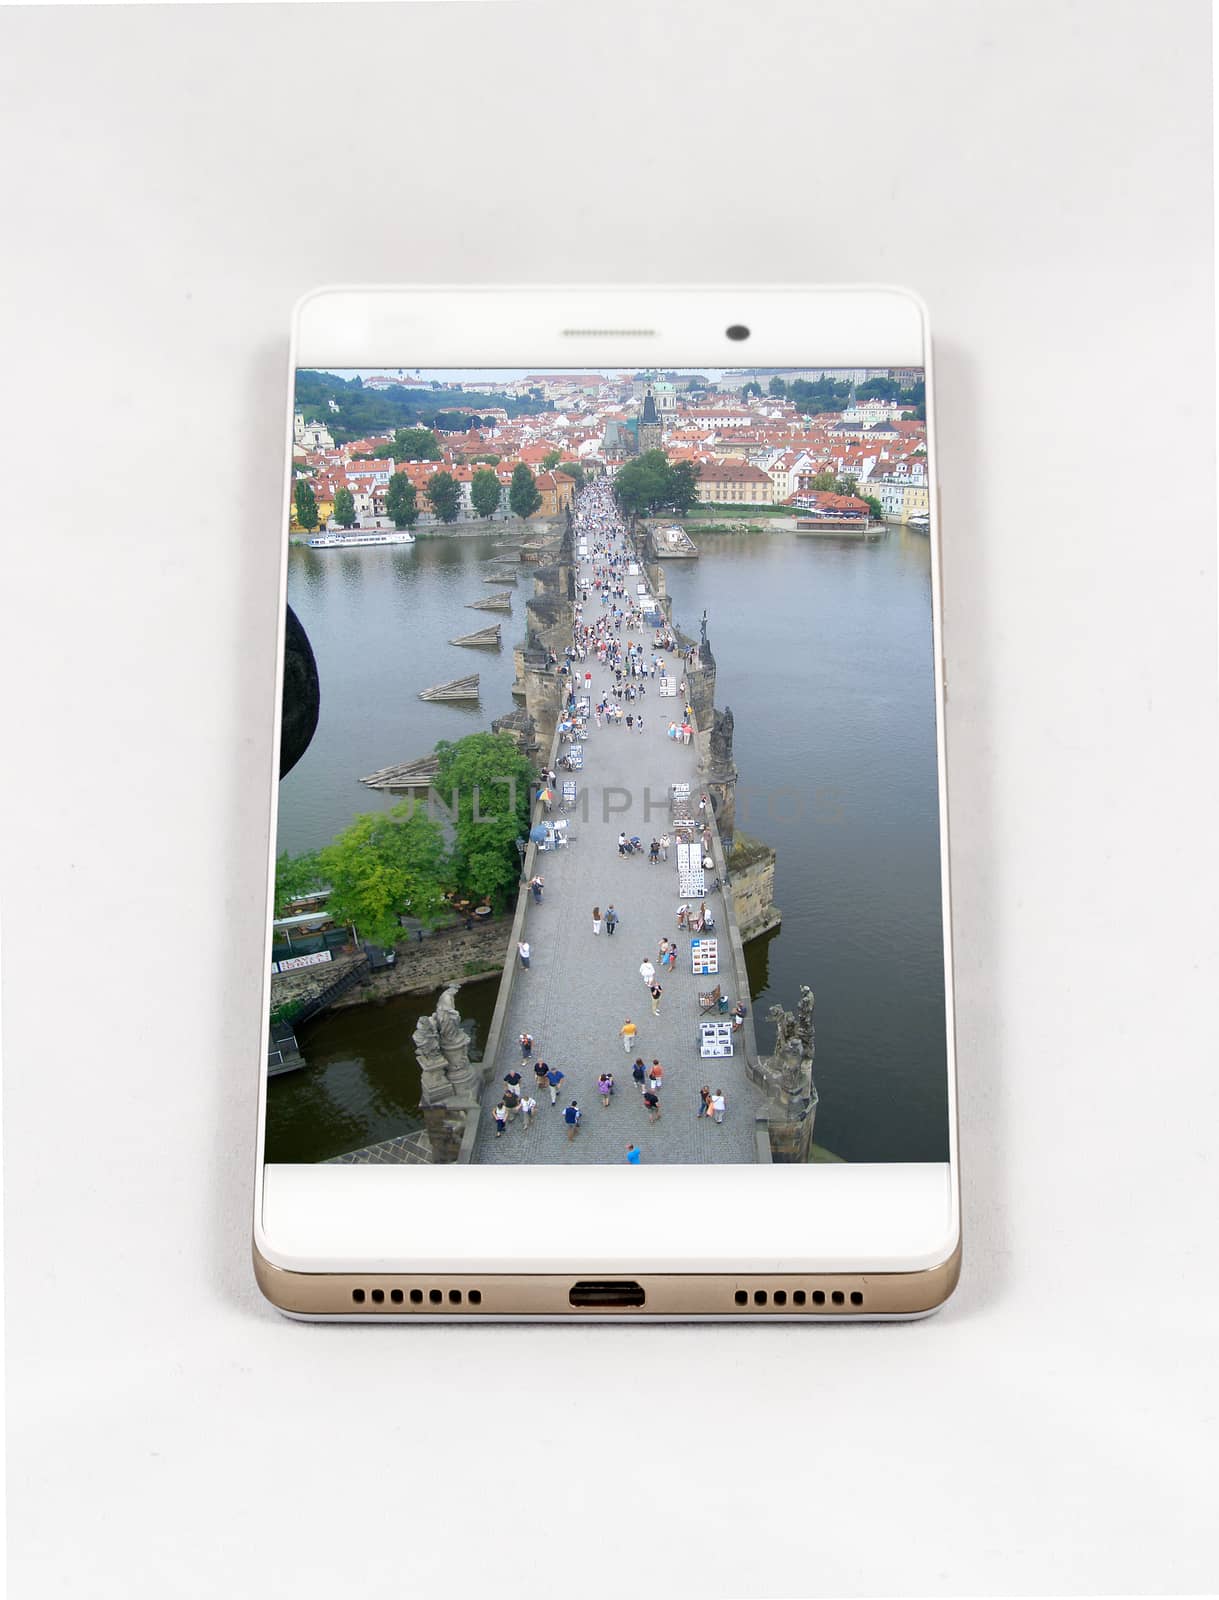 Modern smartphone with full screen picture of Charles Bridge and the Castle of Prague, Czech Republic. Concept for travel smartphone photography. All images in this composition are made by me and separately available on my portfolio